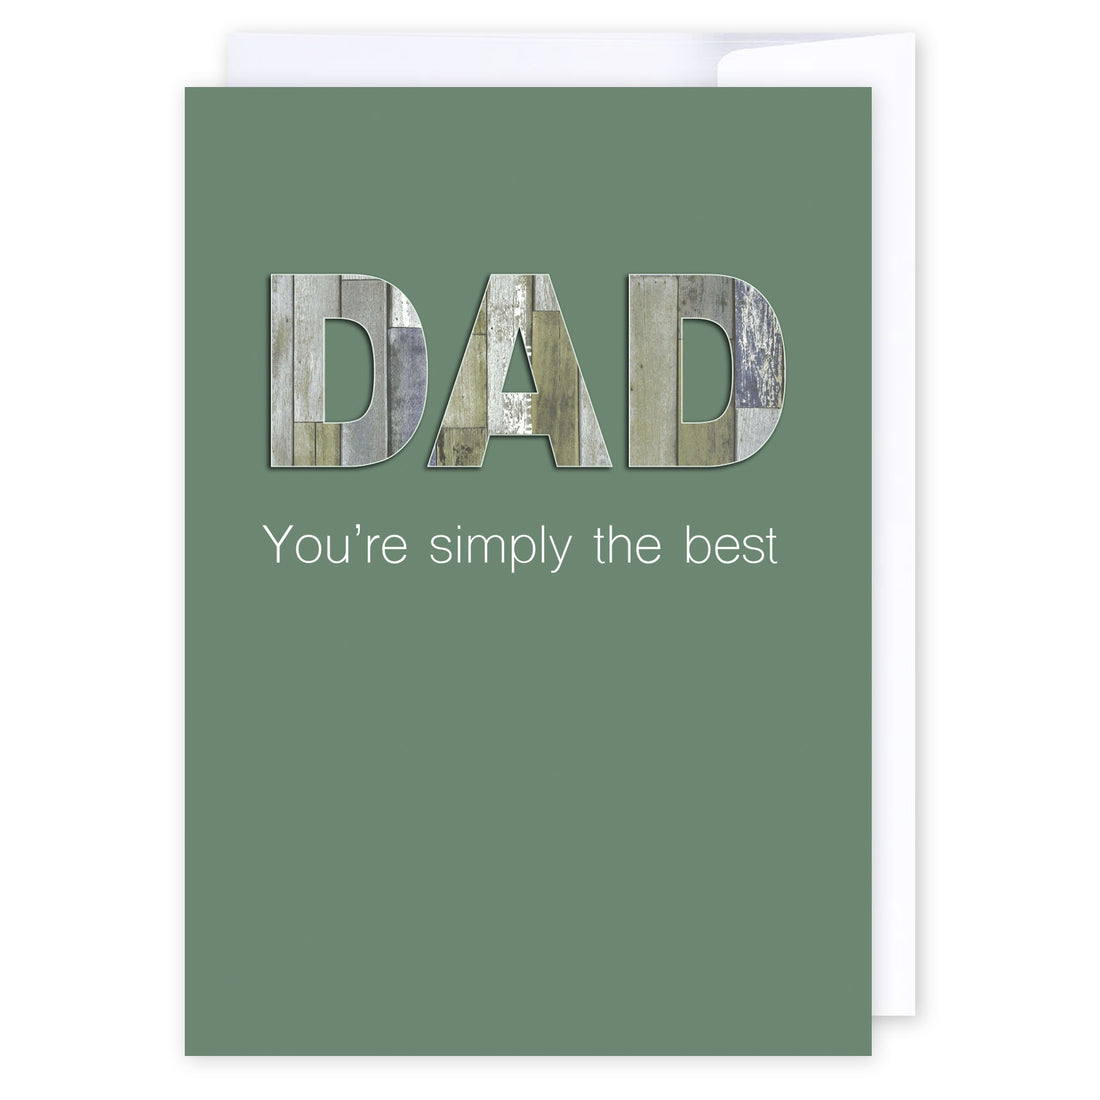 Dad your simply the best